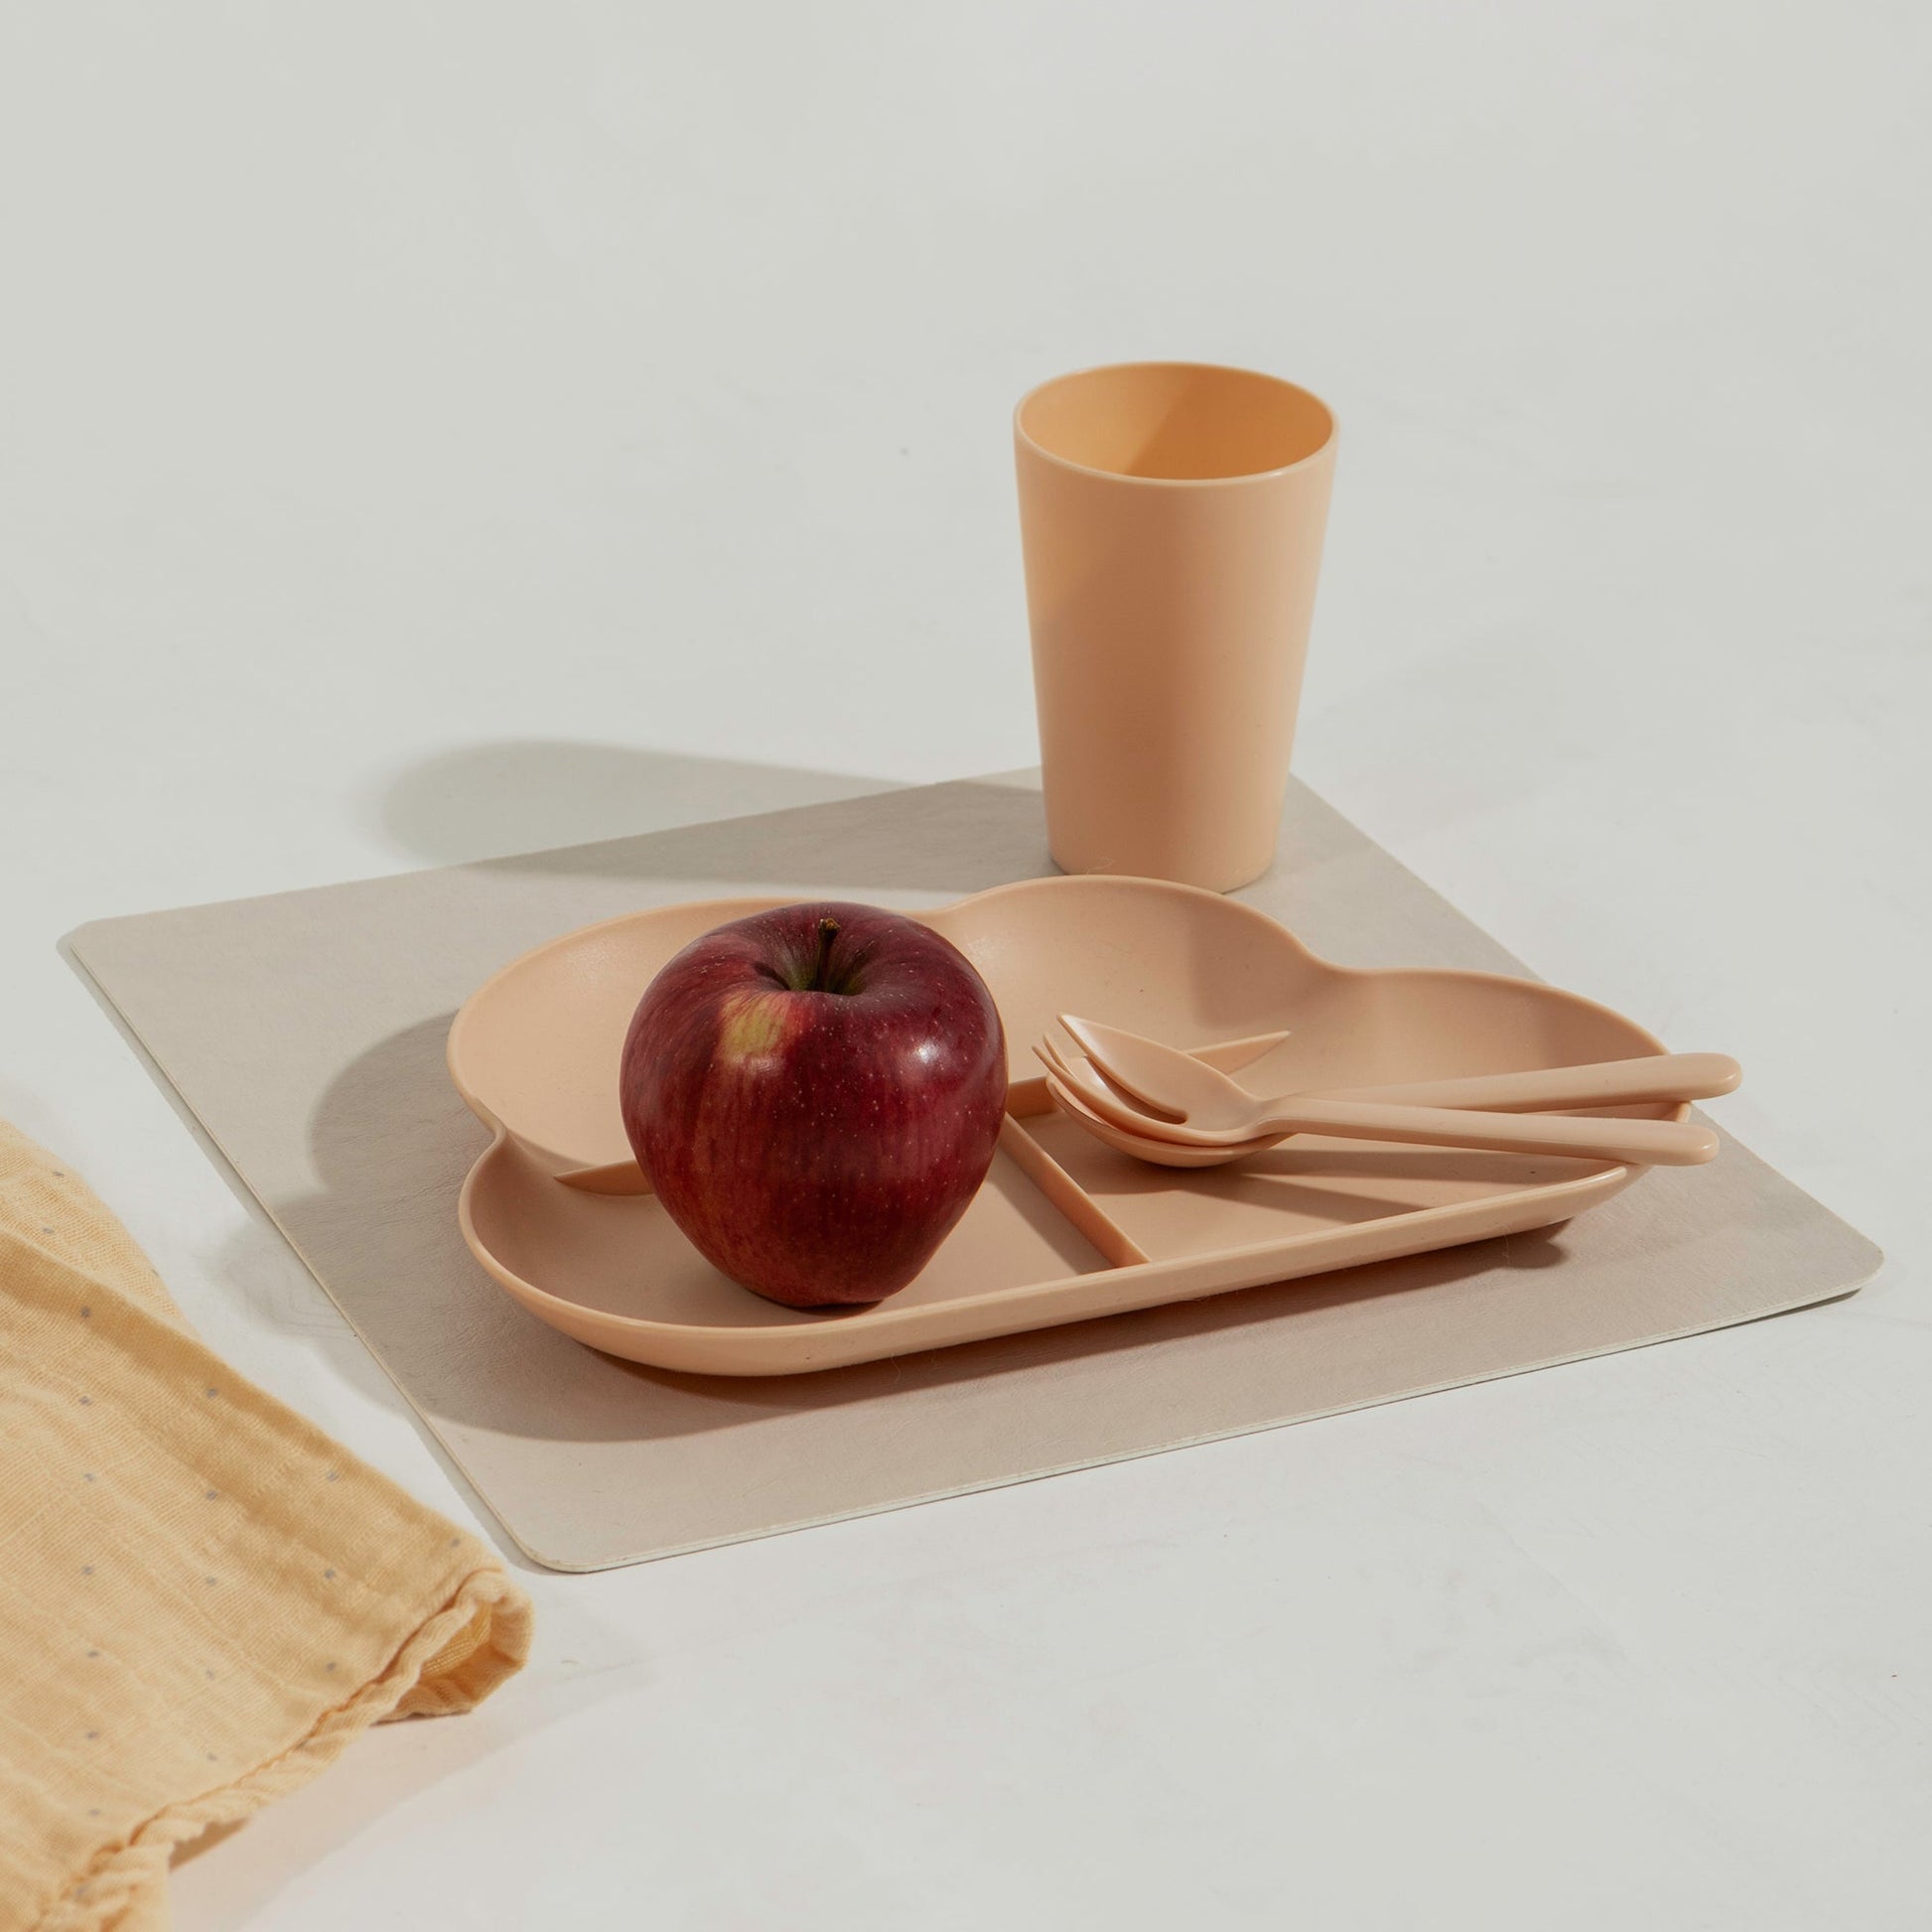 A beige square washable paper placemat sits on a white table. On top of it is a child's plate, cup, and cutlery in matching melamine peach colour, with an apple on the plate.